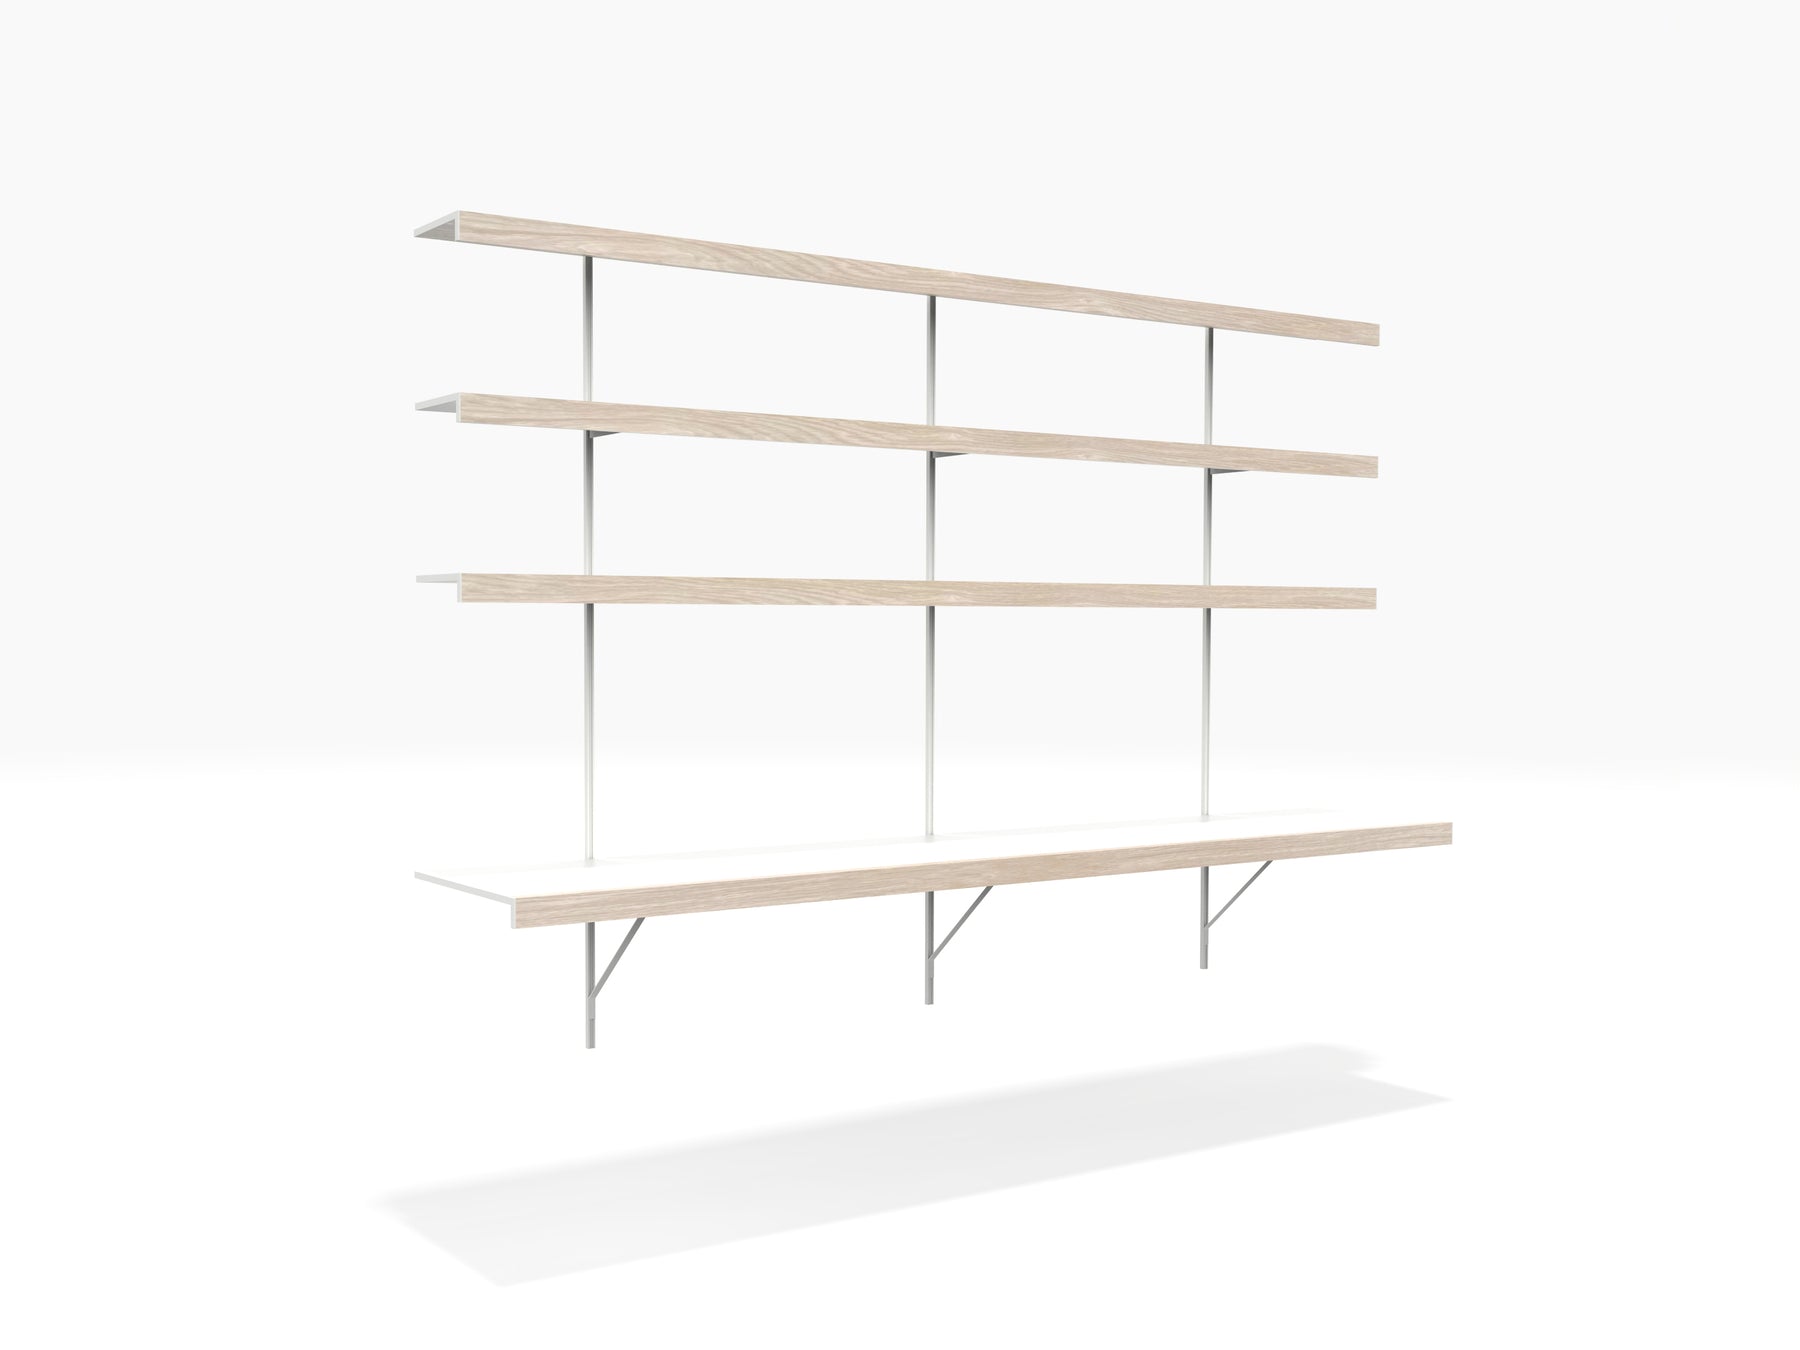 Oak and white shelving system with wall desk and shelves above